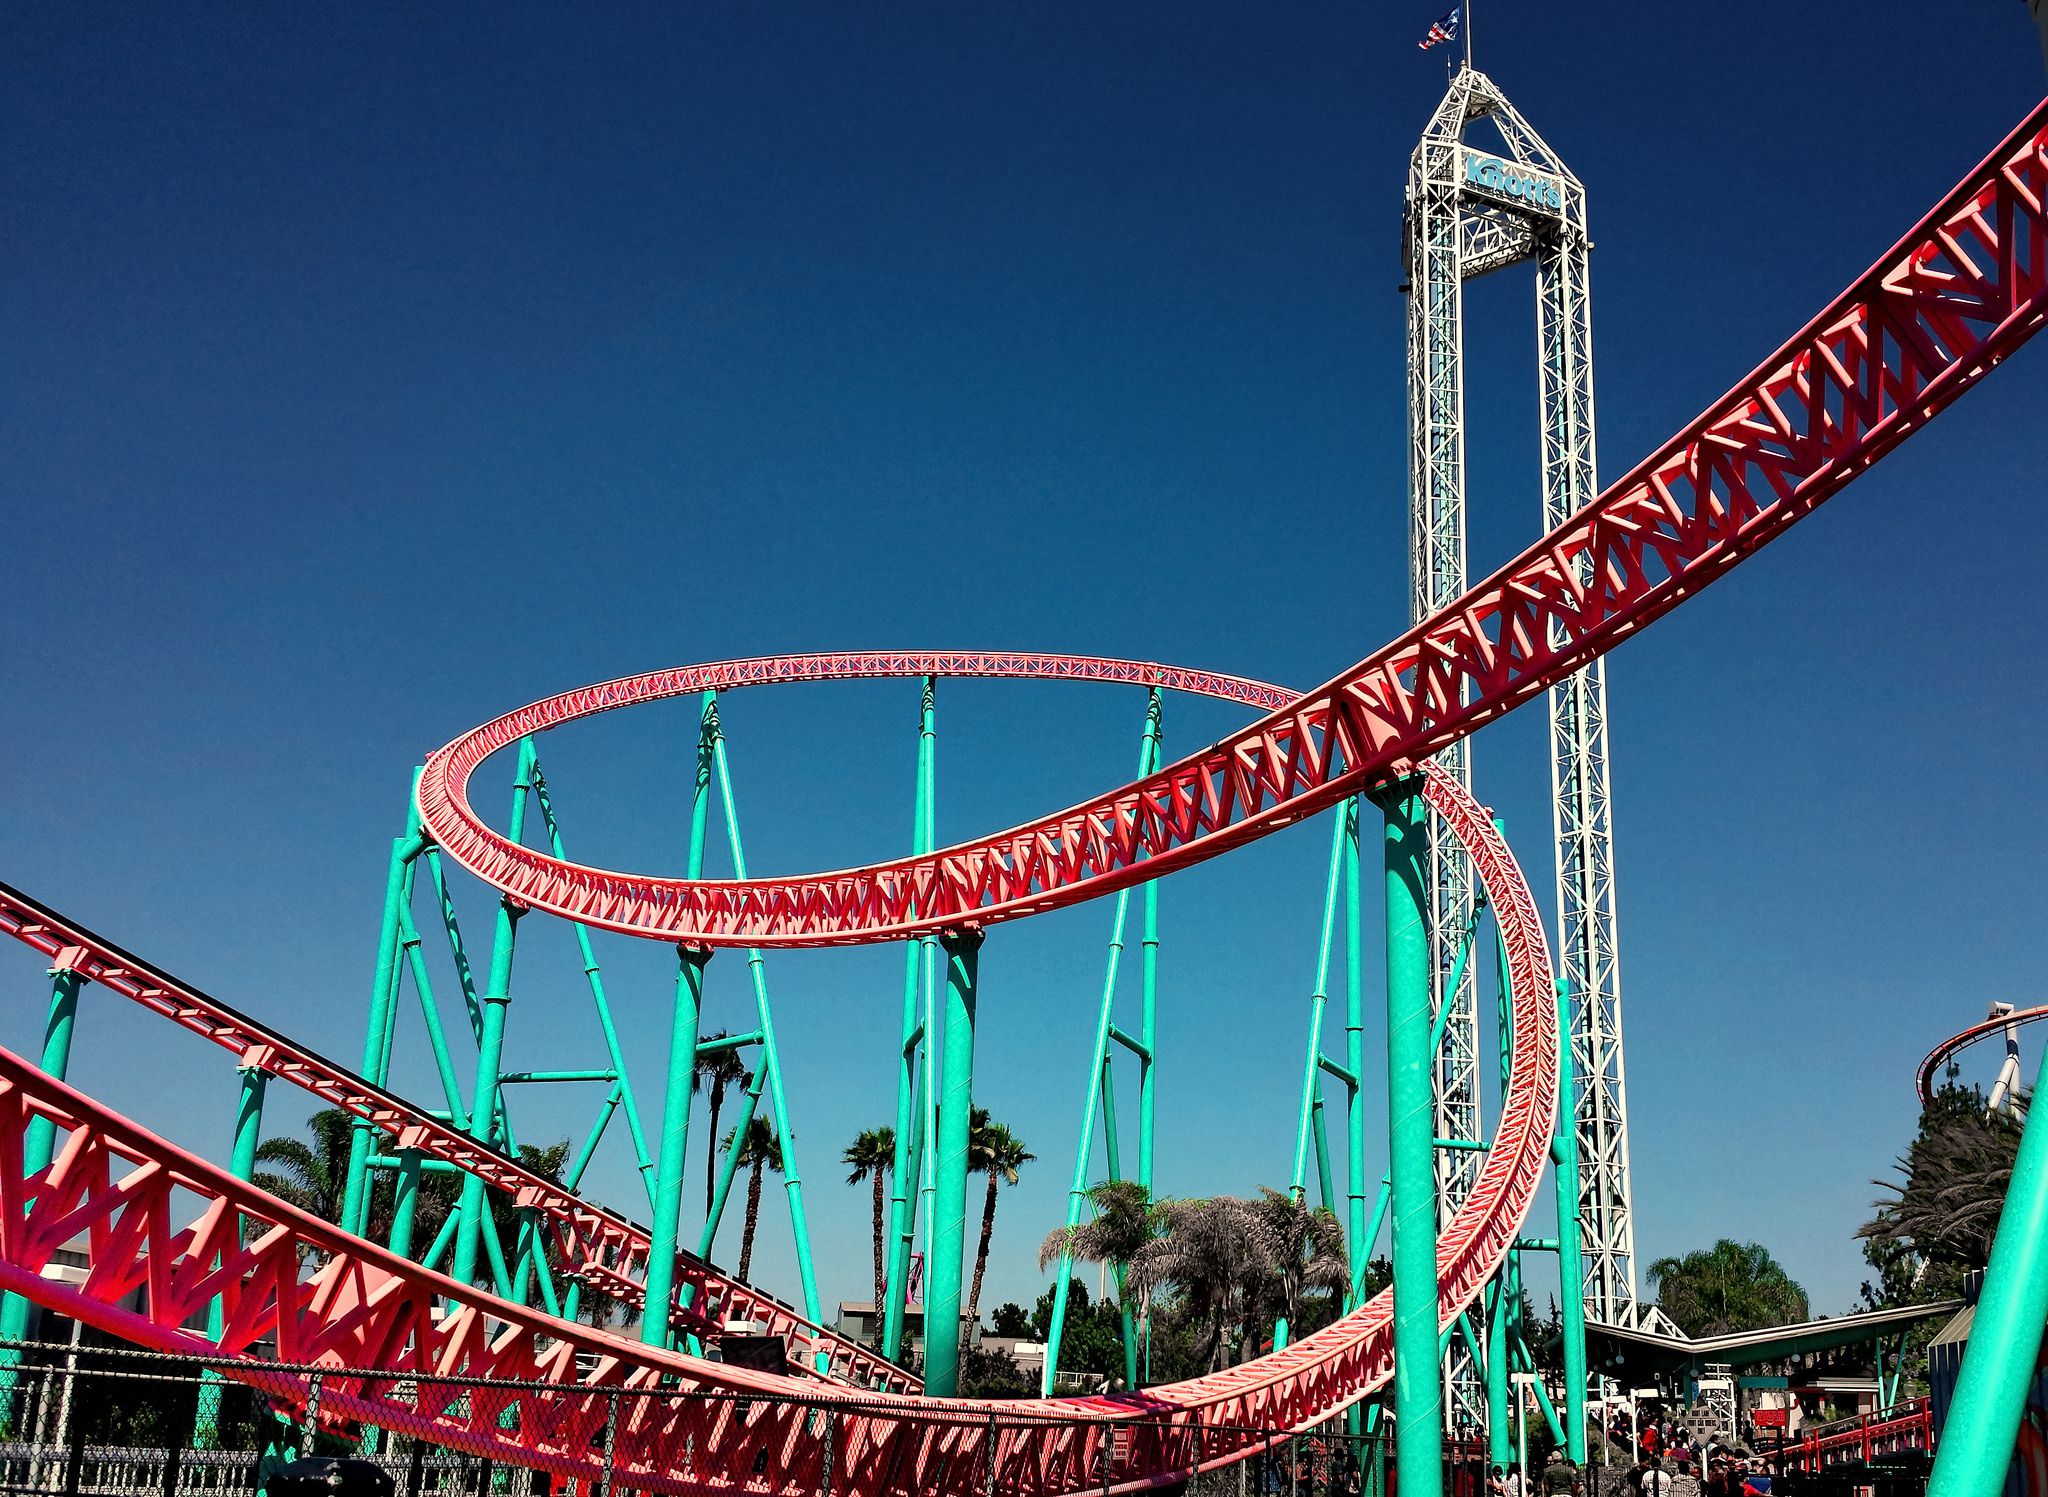 The World's Fastest Roller Coasters